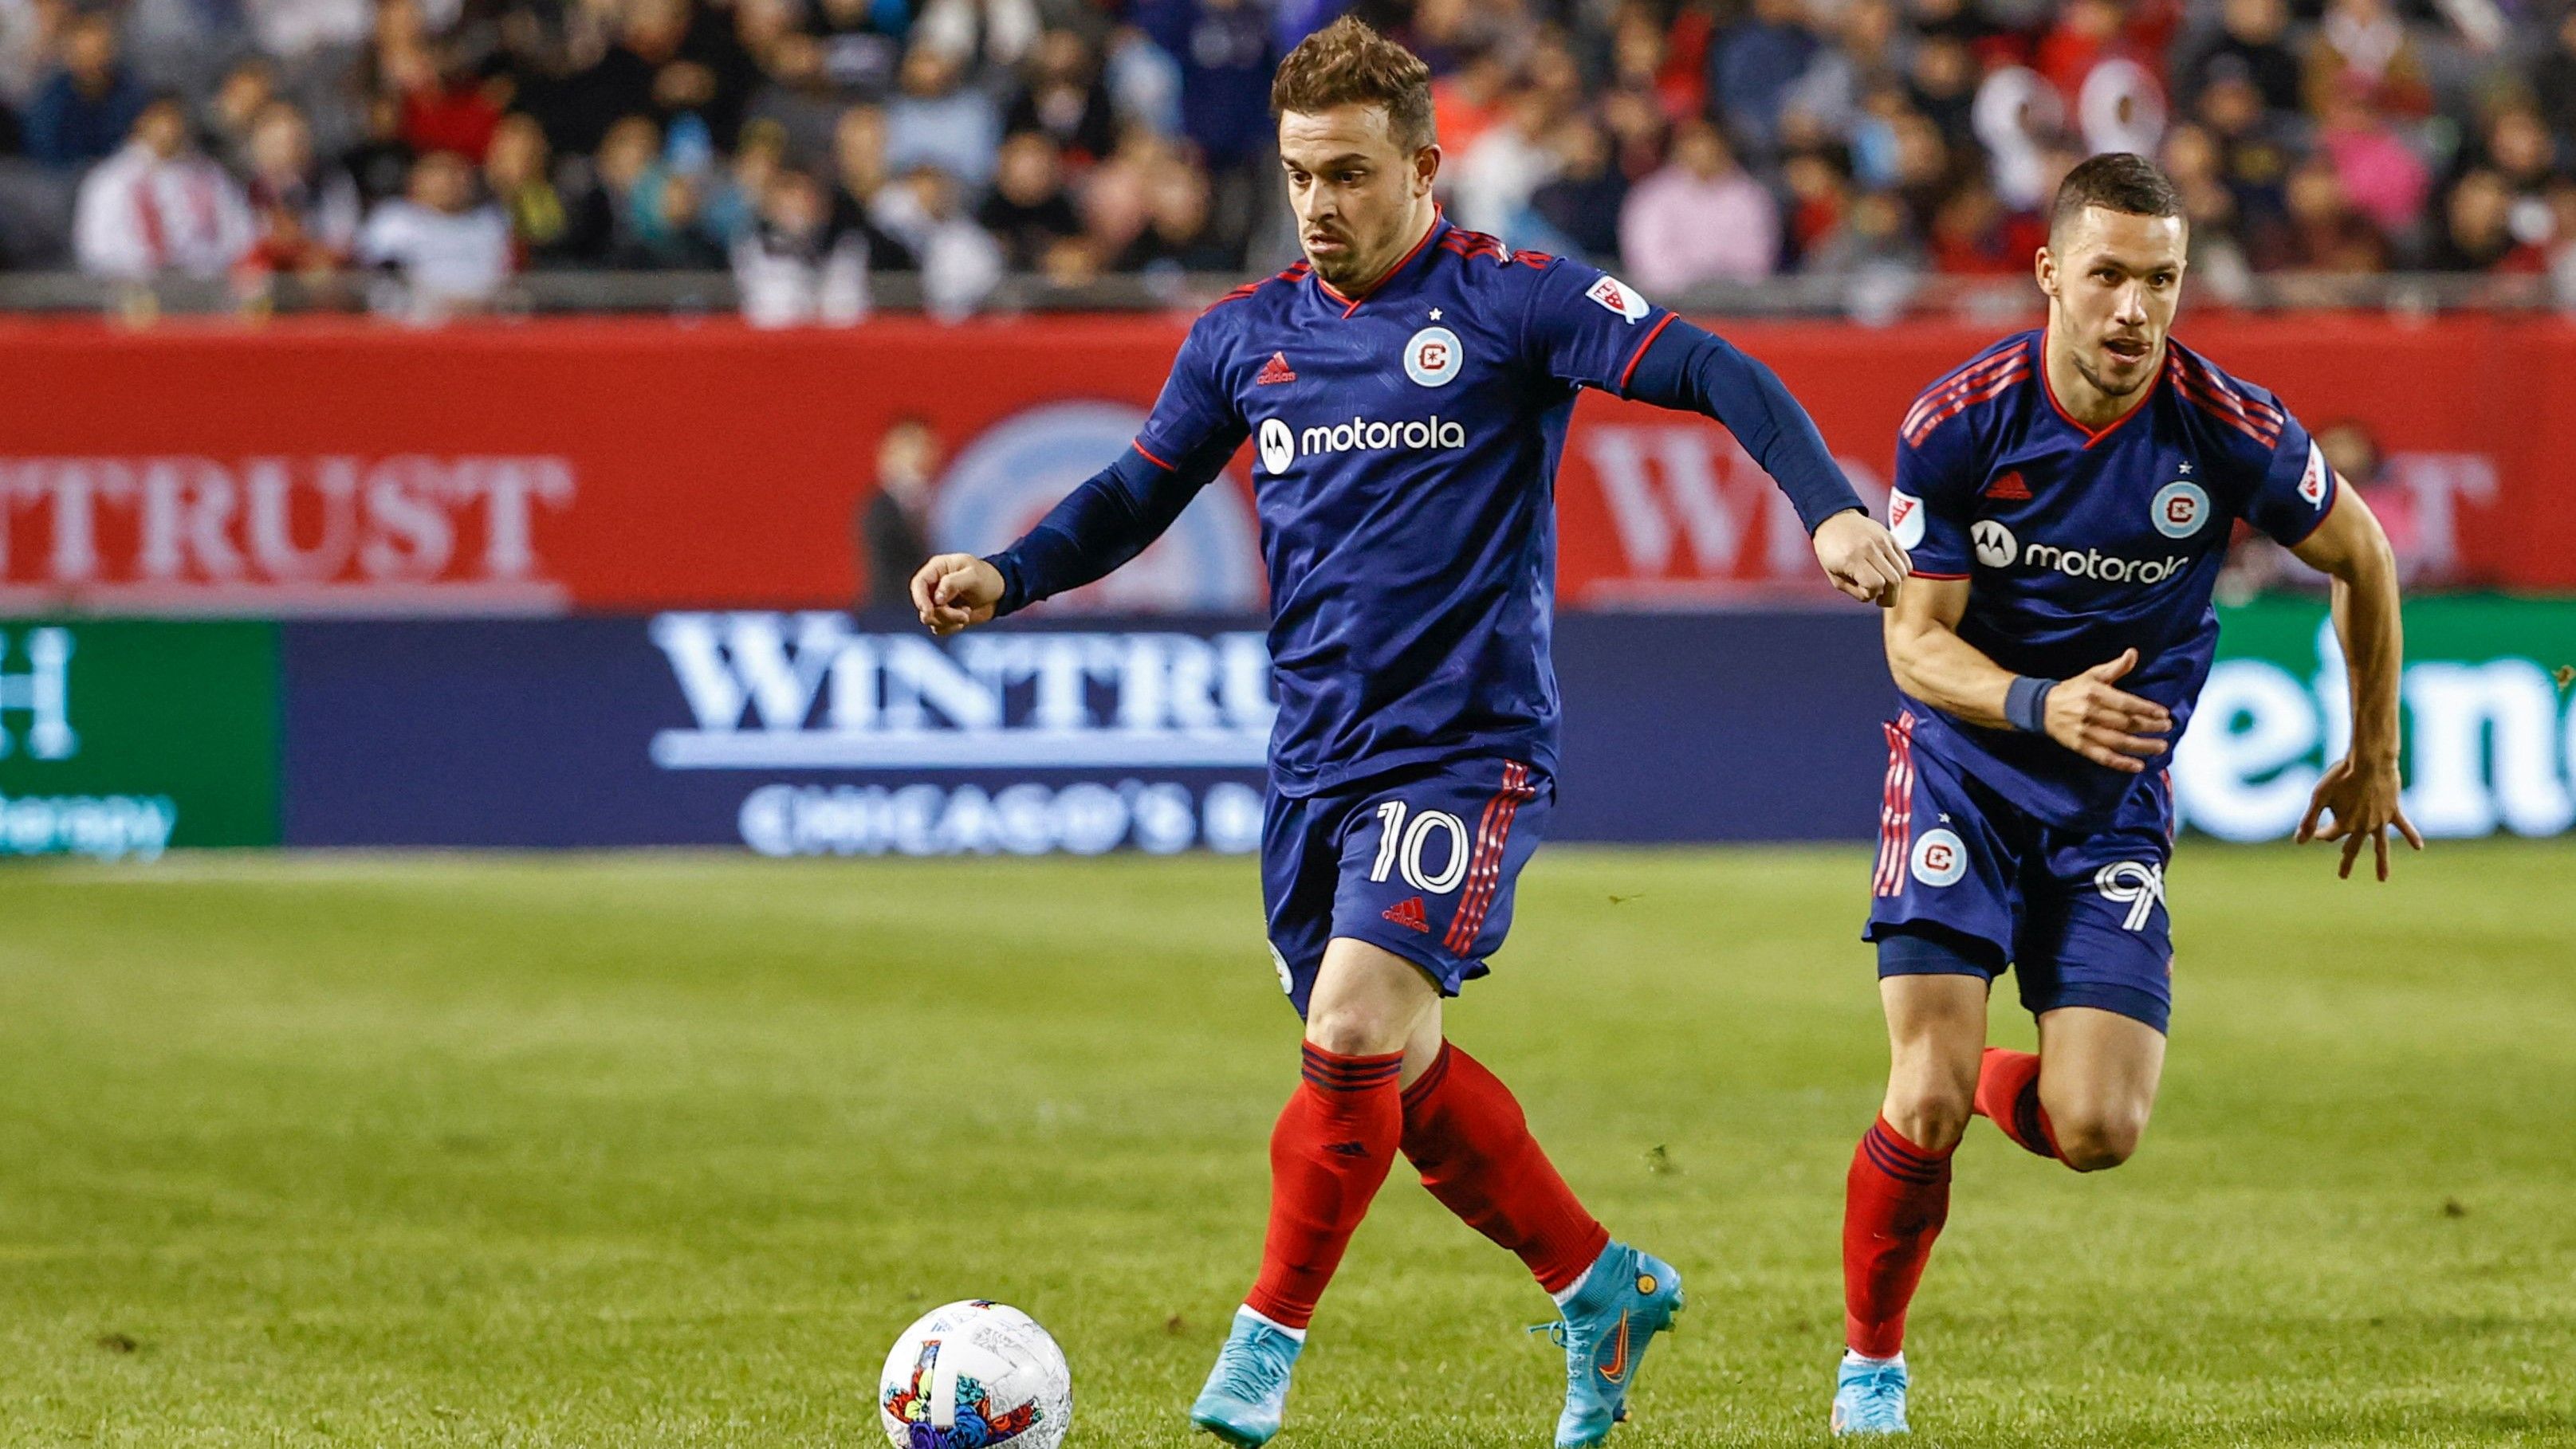 Chicago Fire vs New York Red Bulls: Where to watch the match 